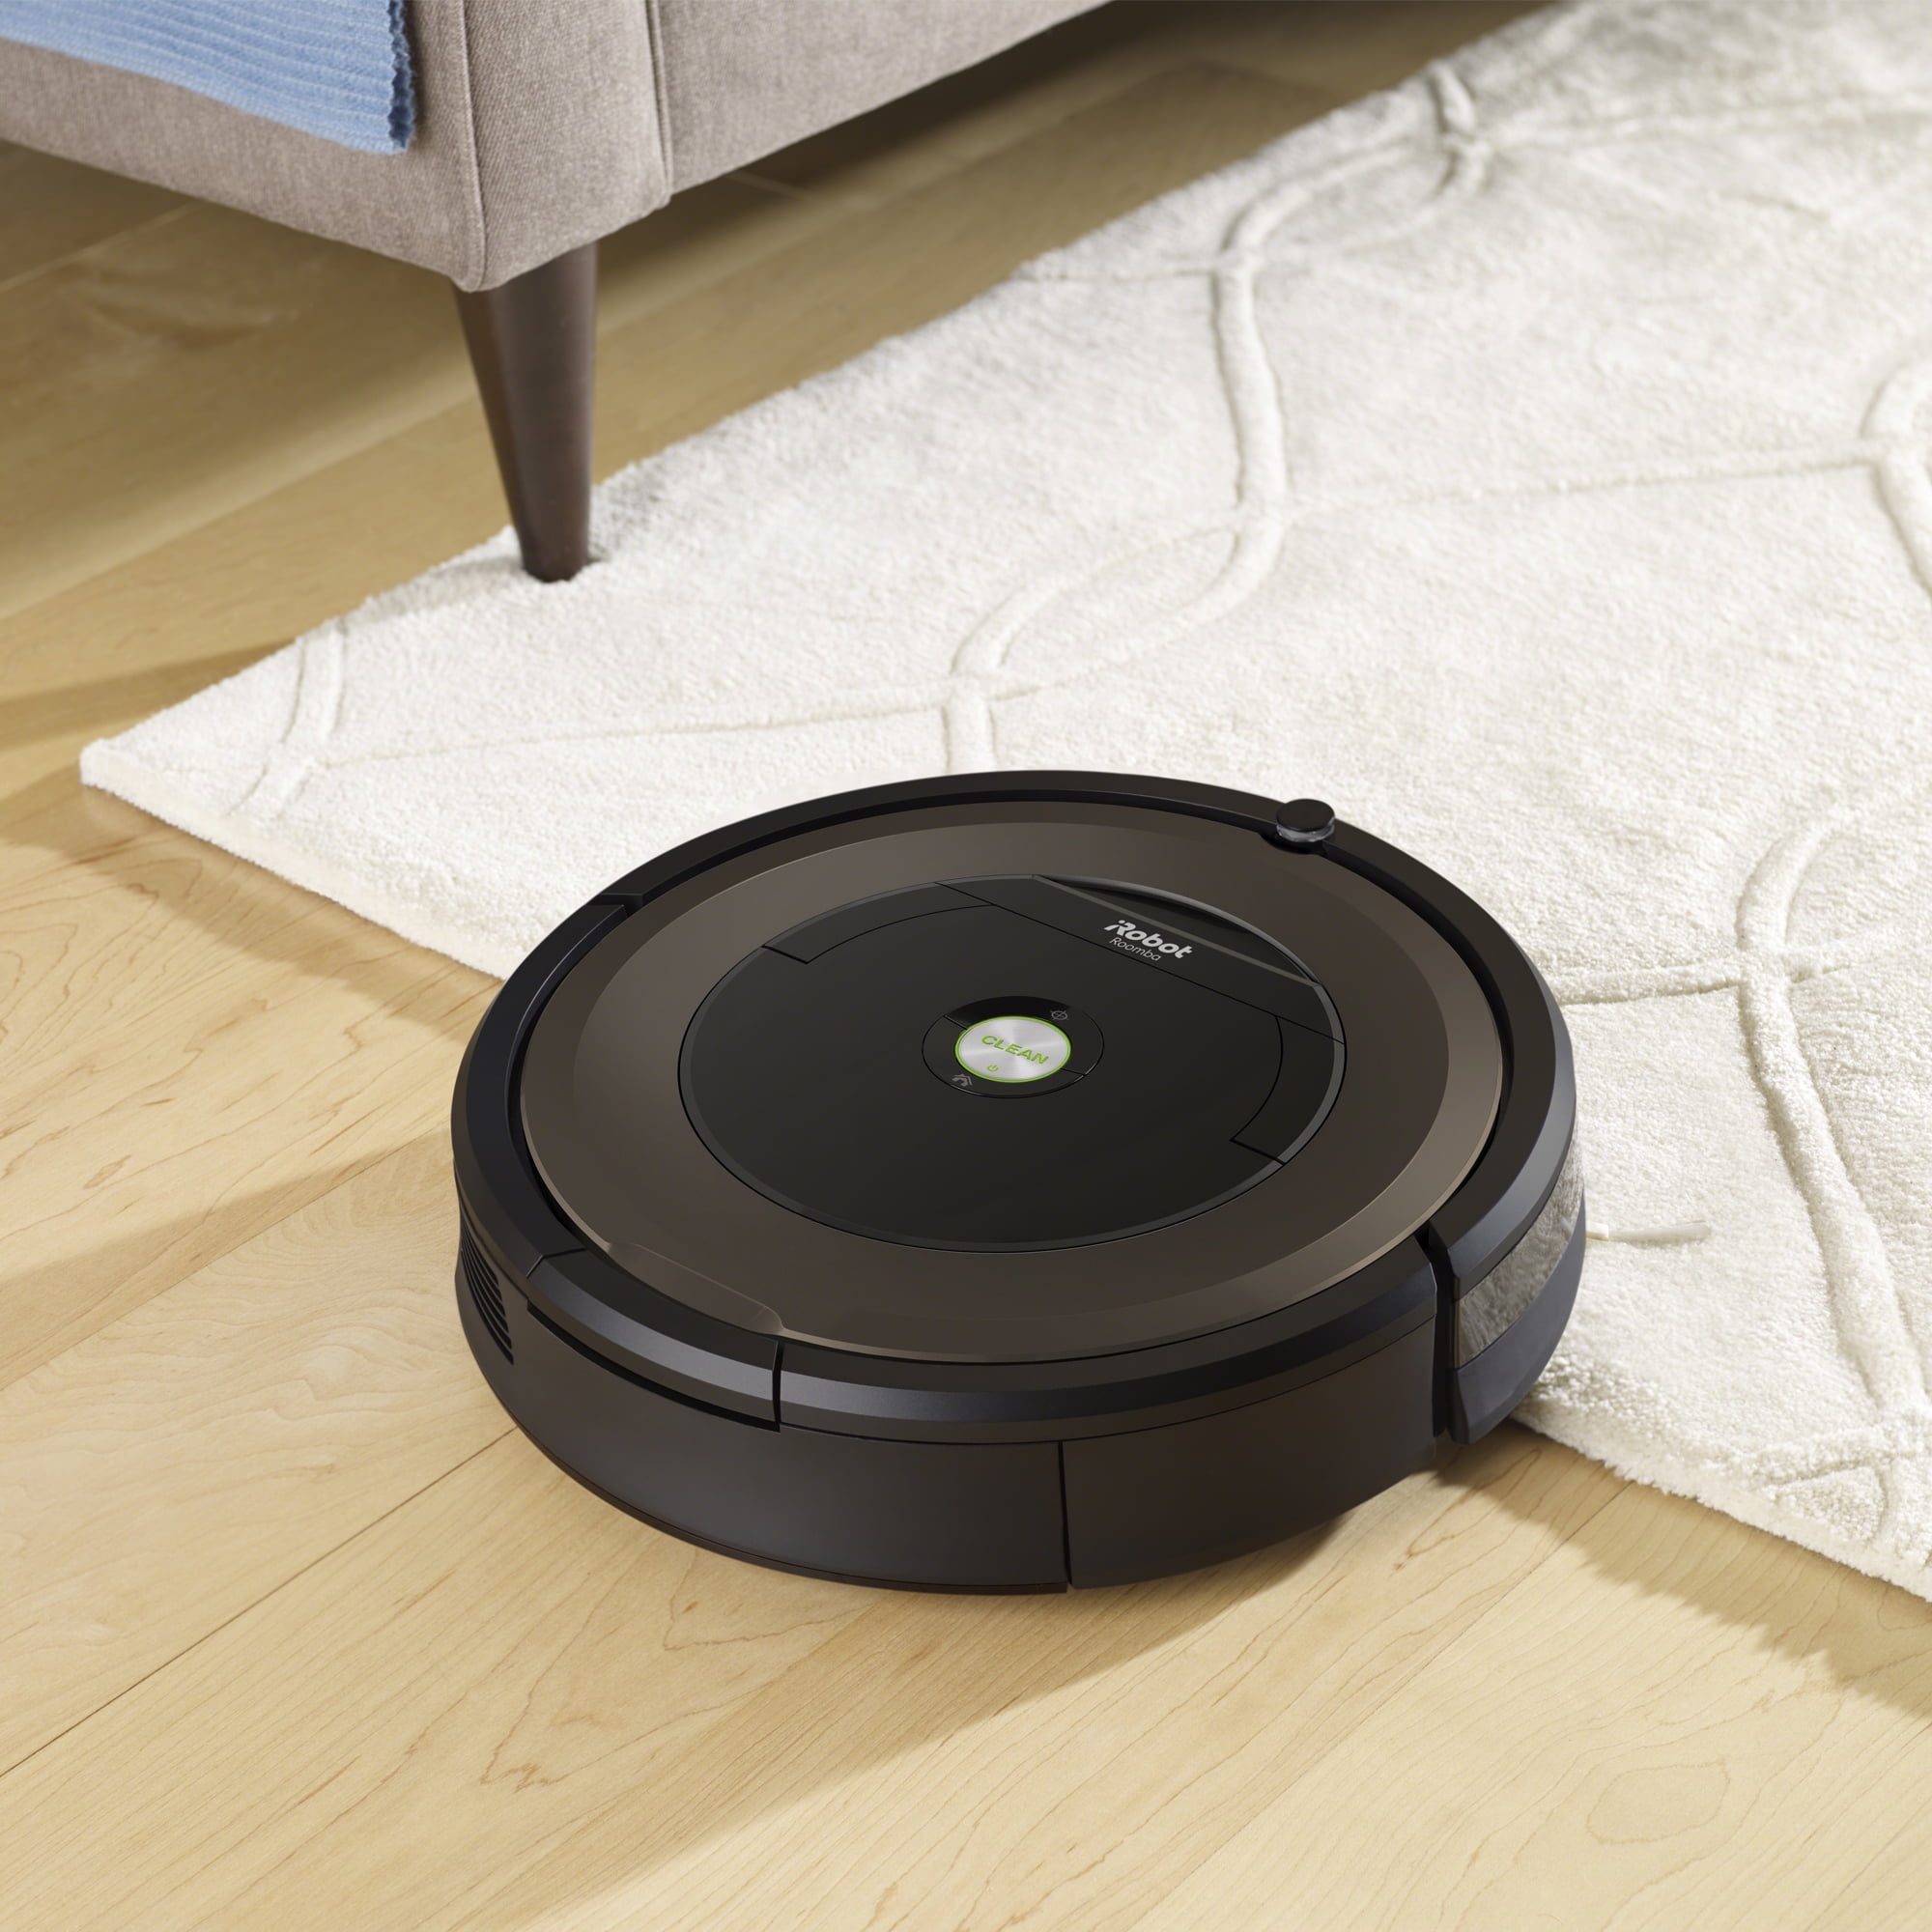 iRobot Roomba 890 Robot Vacuum- Wi-Fi Connected, Works with Google Home,  Ideal for Pet Hair, Carpets, Hard Floors